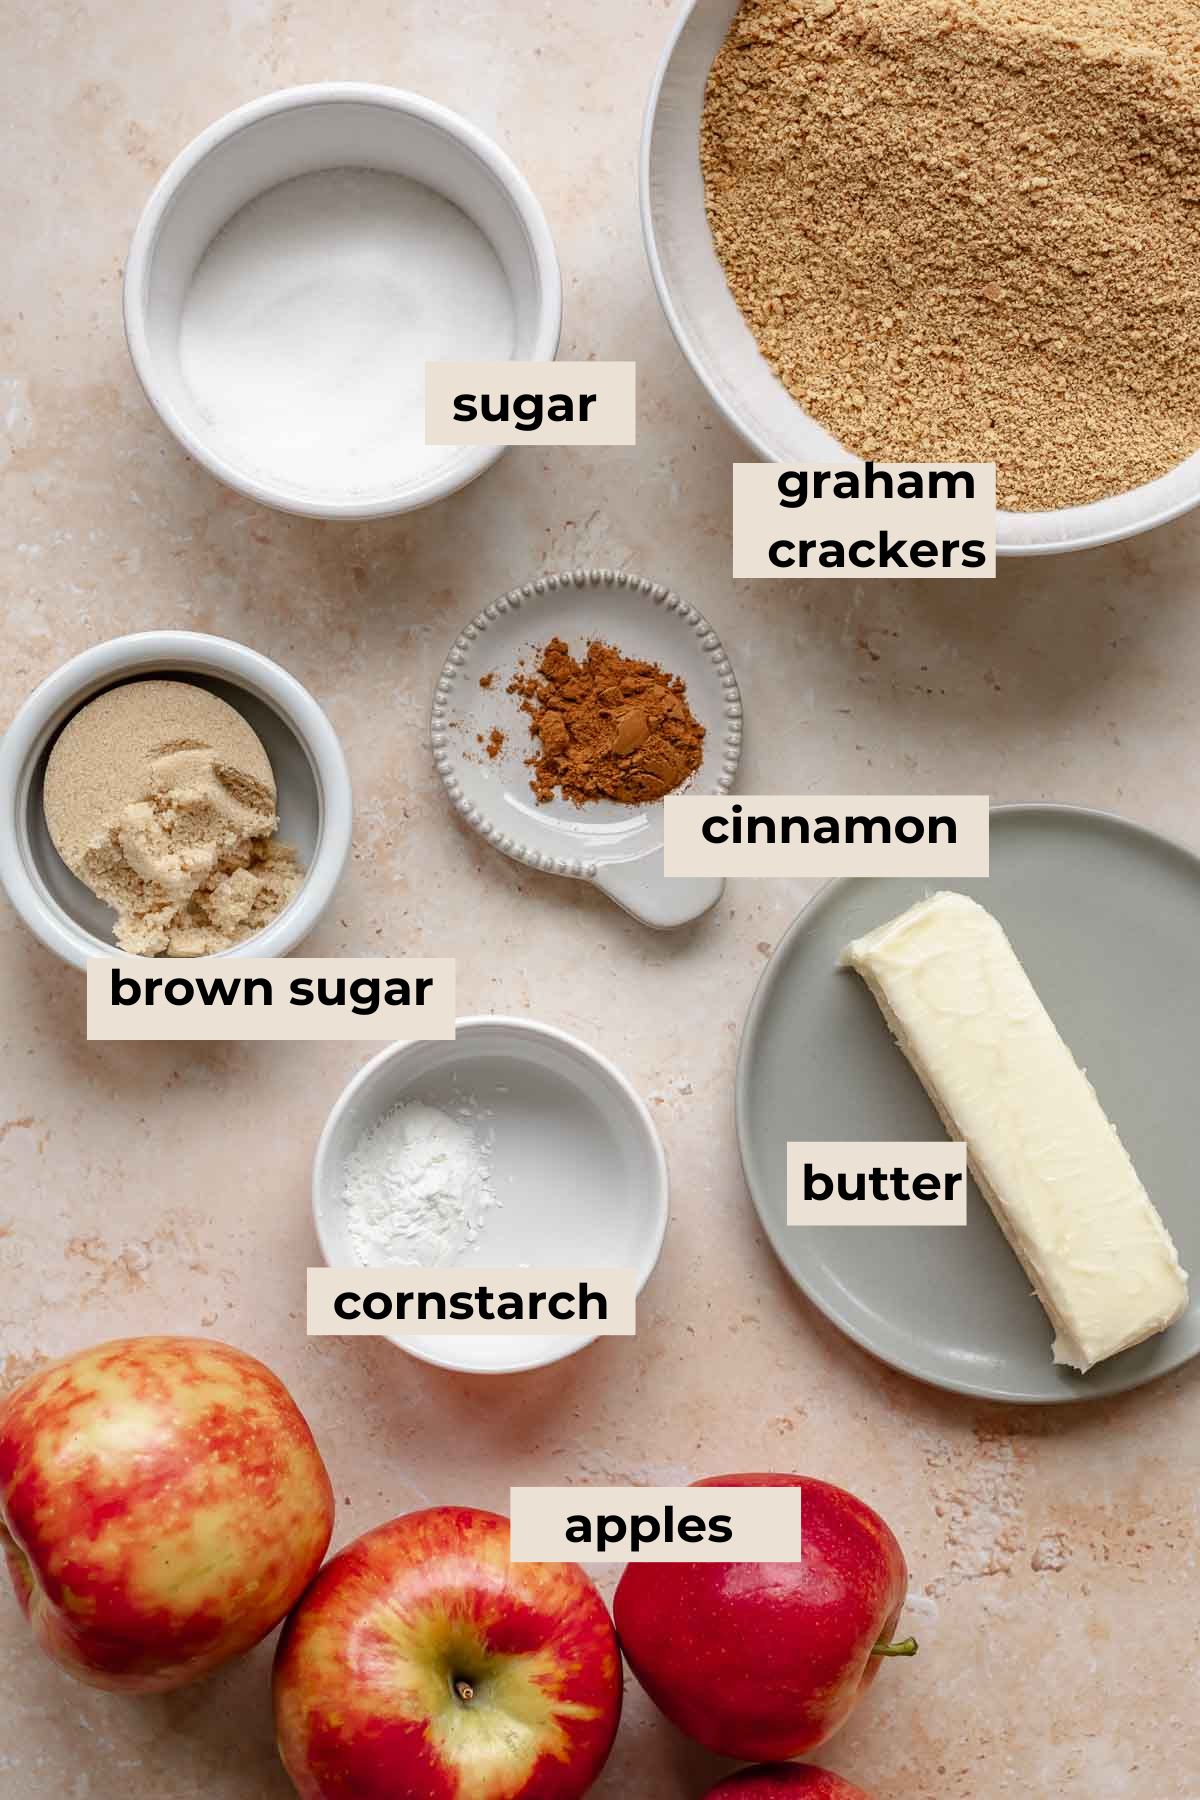 Ingredients for apple crumble cheesecake.